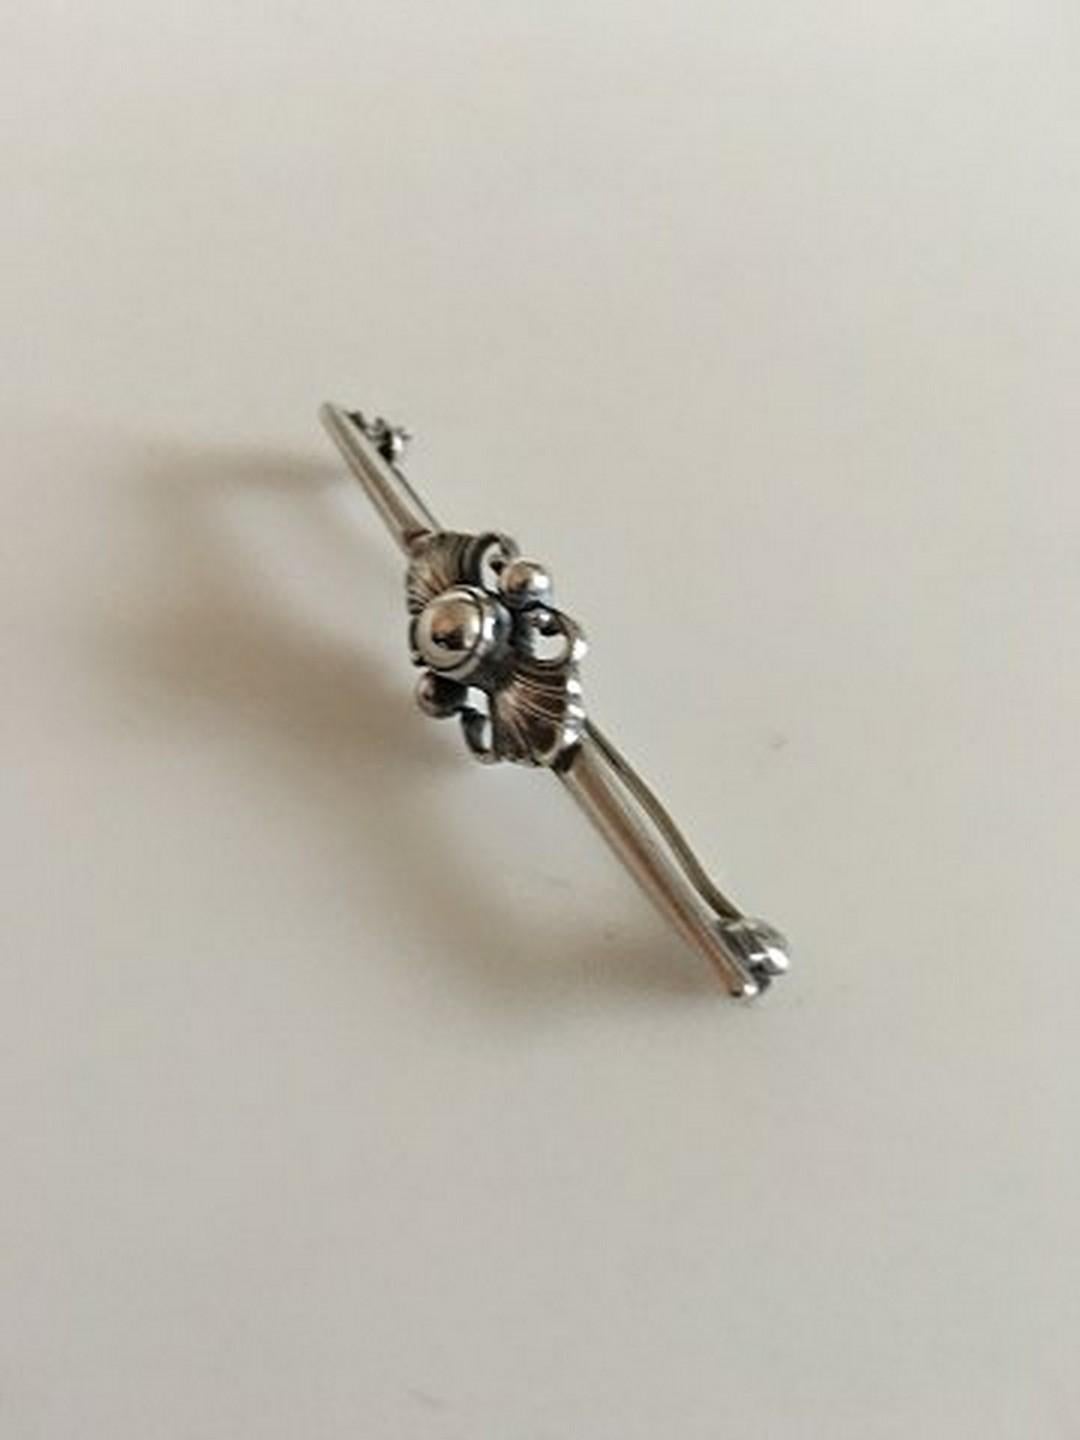 Georg Jensen Sterling Silver Brooch No 214. Measures 5.5 cm / 2 11/64 in. Weighs 6 g / 0.20 oz. From 1932-1944.